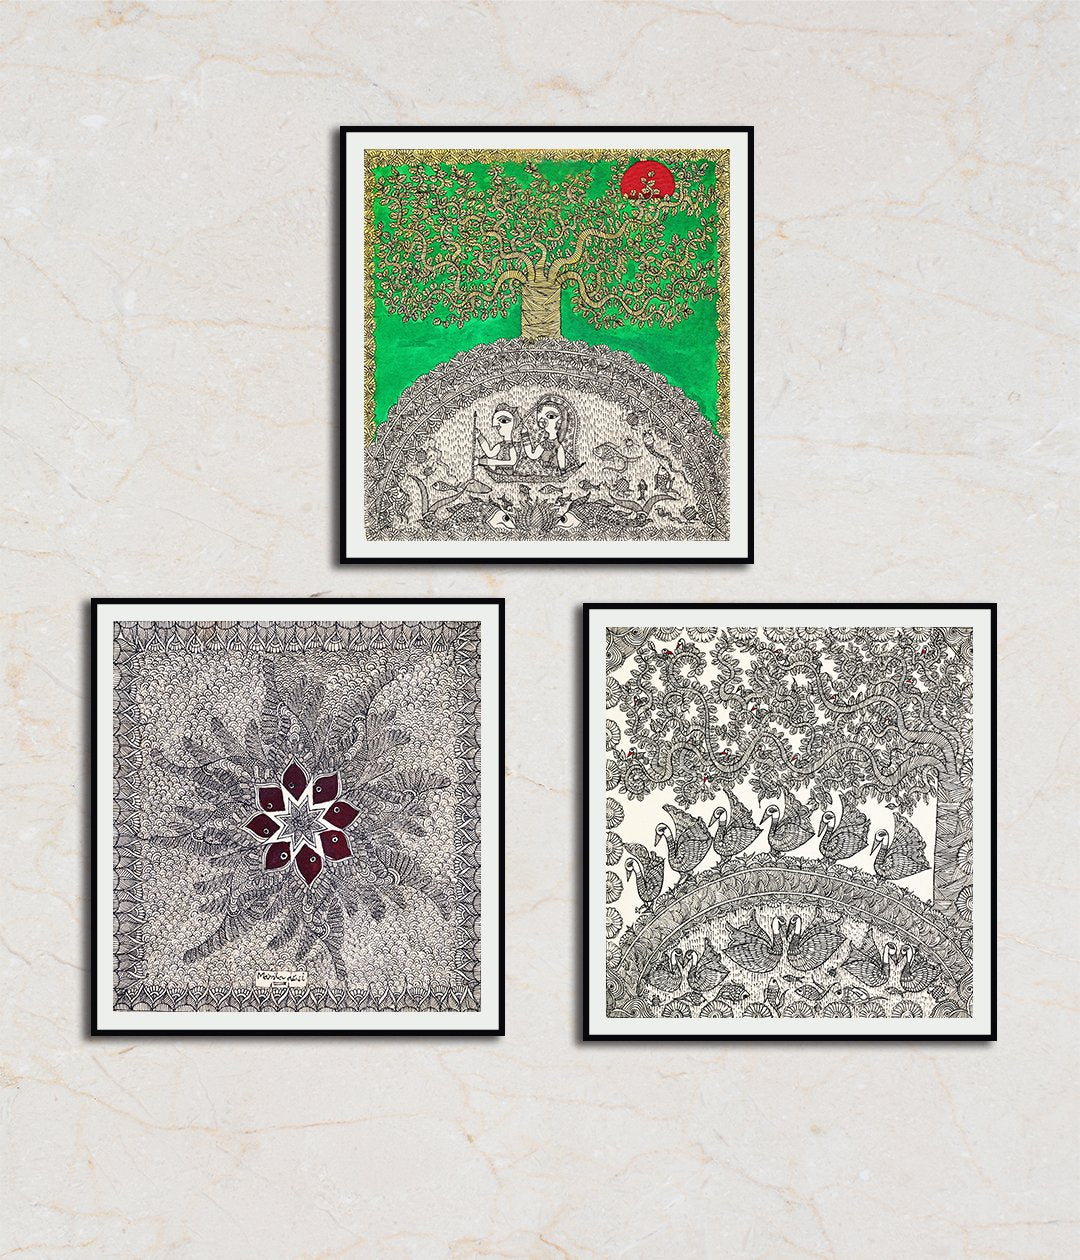 Rendezvous Set Of 3 Madhubani Art Paintings For Home Wall Decor